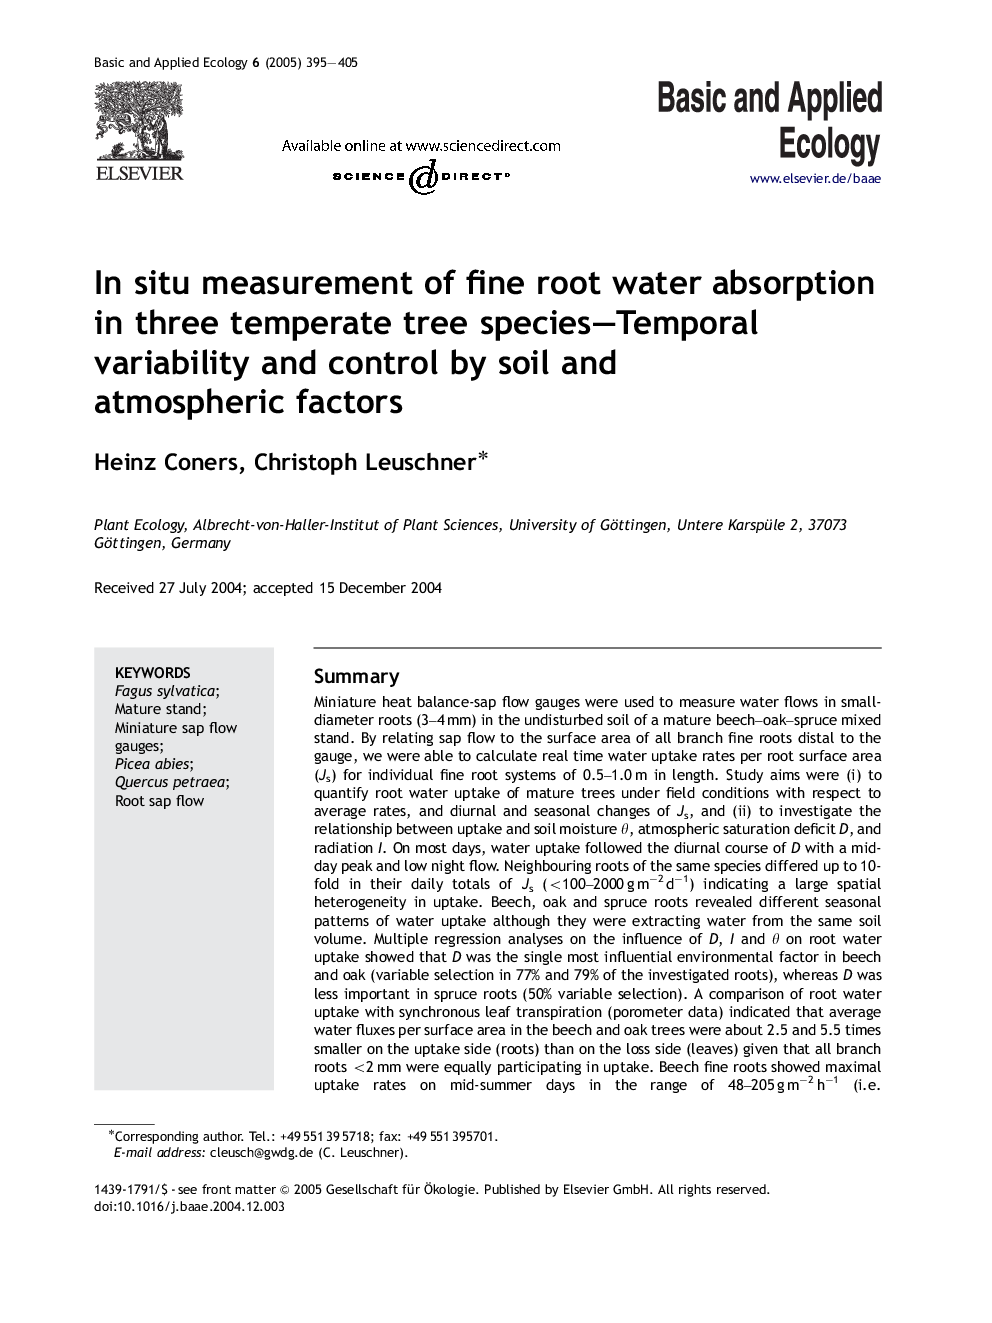 In situ measurement of fine root water absorption in three temperate tree species-Temporal variability and control by soil and atmospheric factors